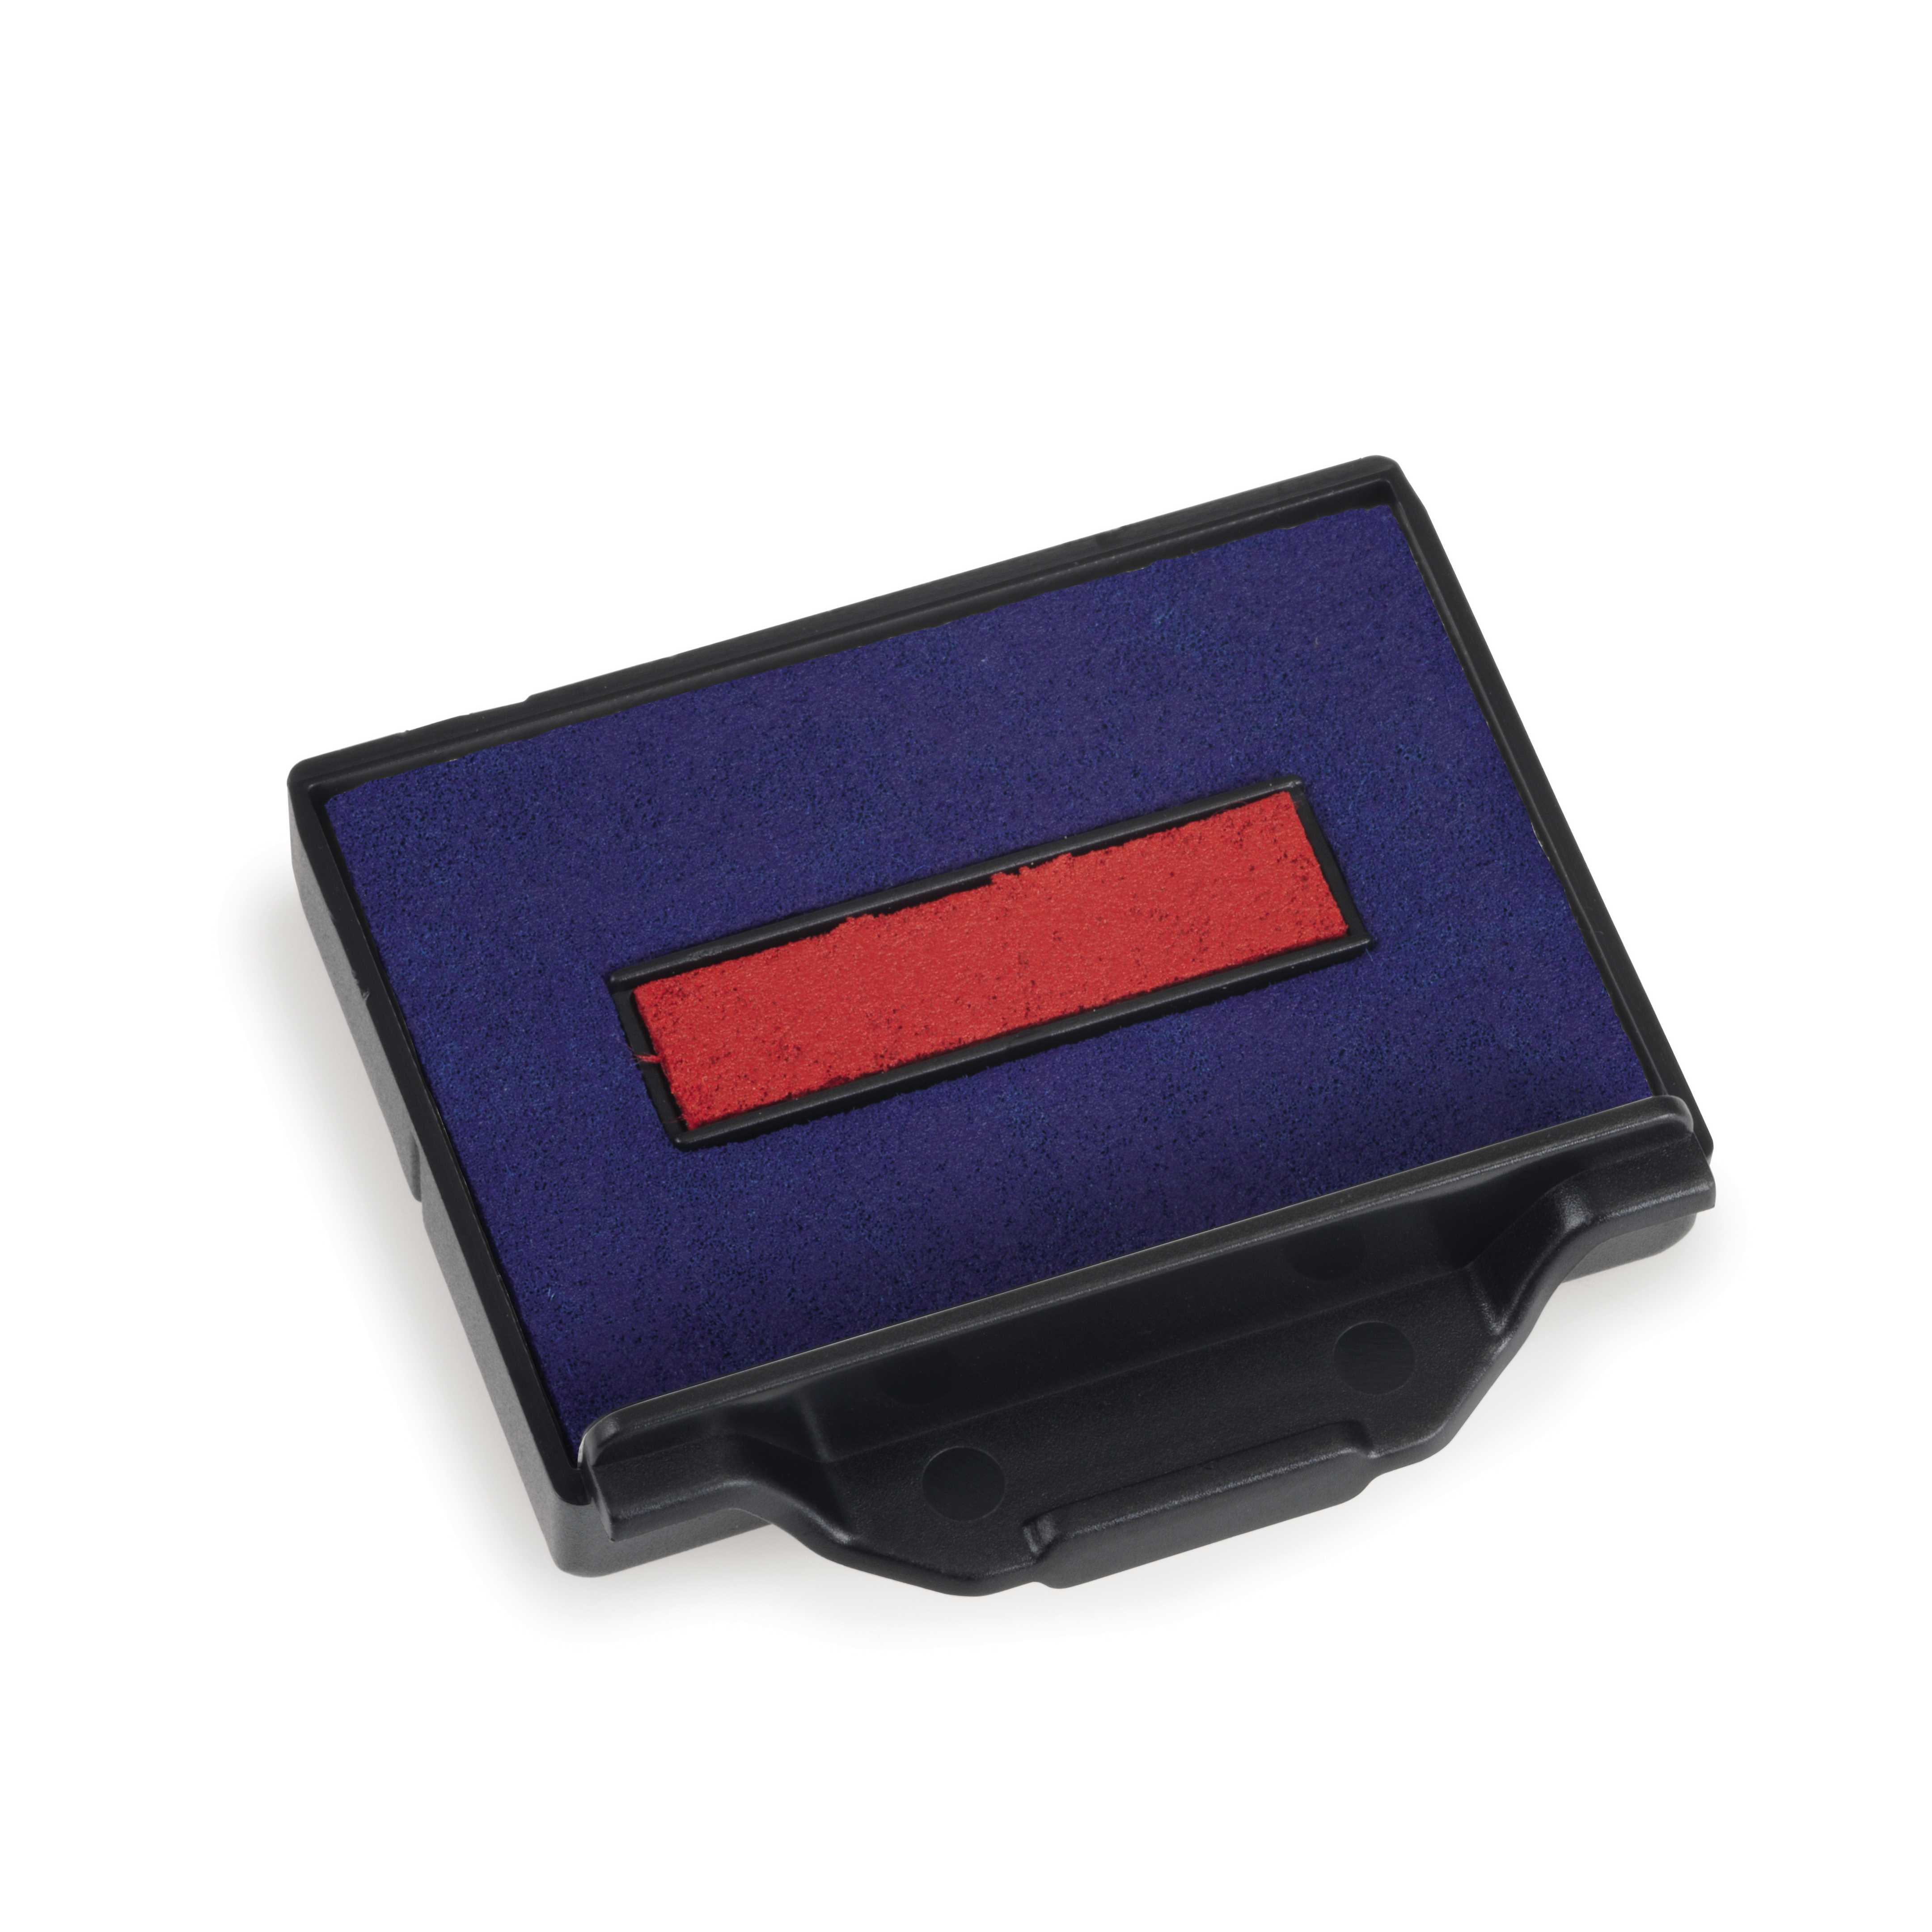 Replacement Pad for Trodat 5200 Self Inking Stamp - Blue/Red Ink Color